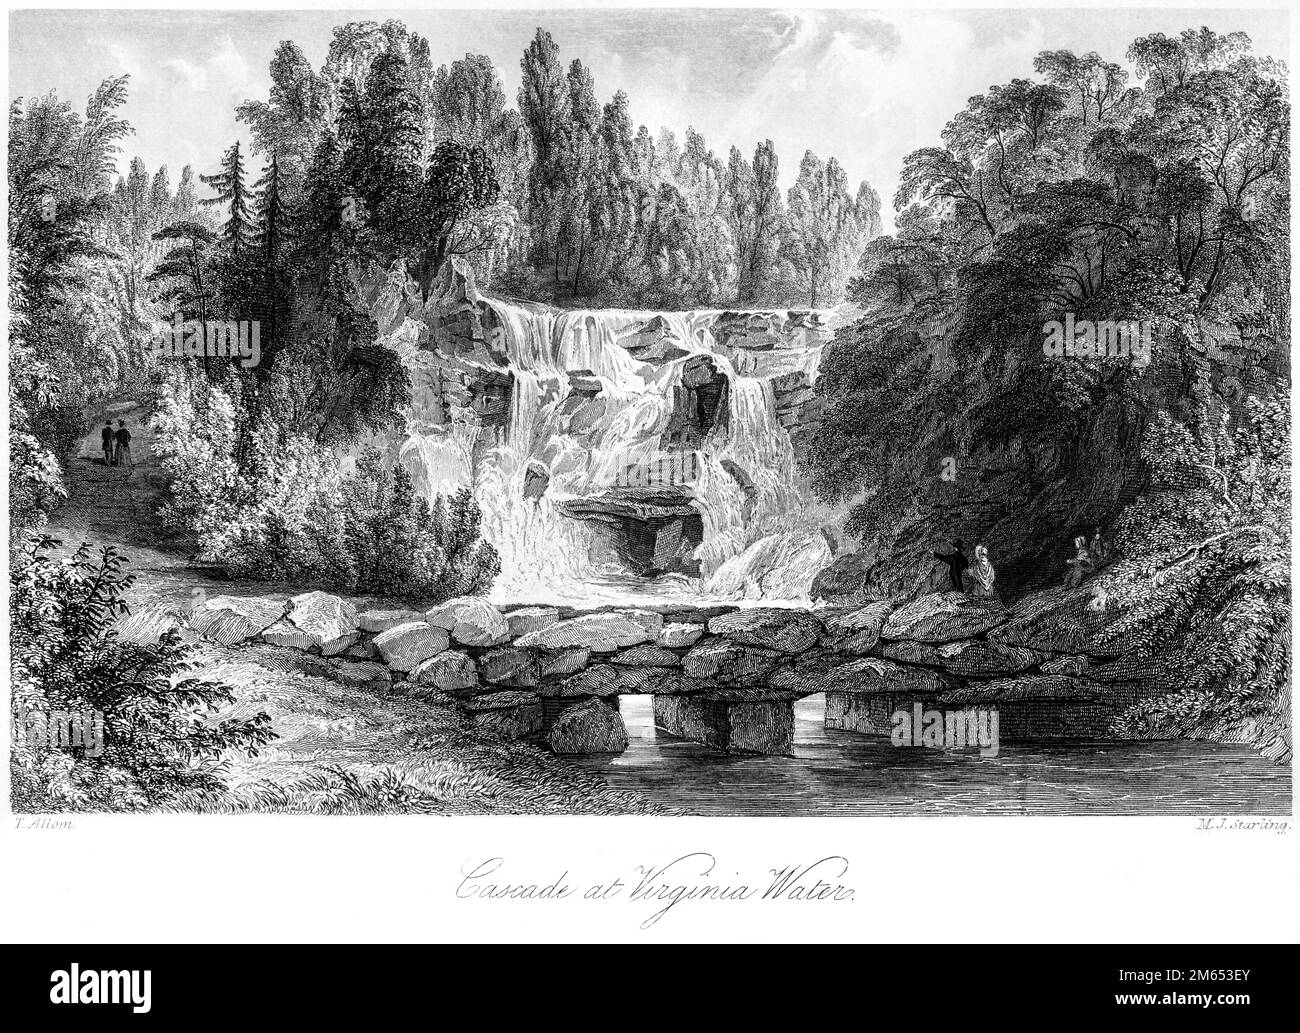 An engraving of the Cascade at Virginia Water, Surrey scanned at high resolution from a book printed in 1850. Believed copyright free. Stock Photo